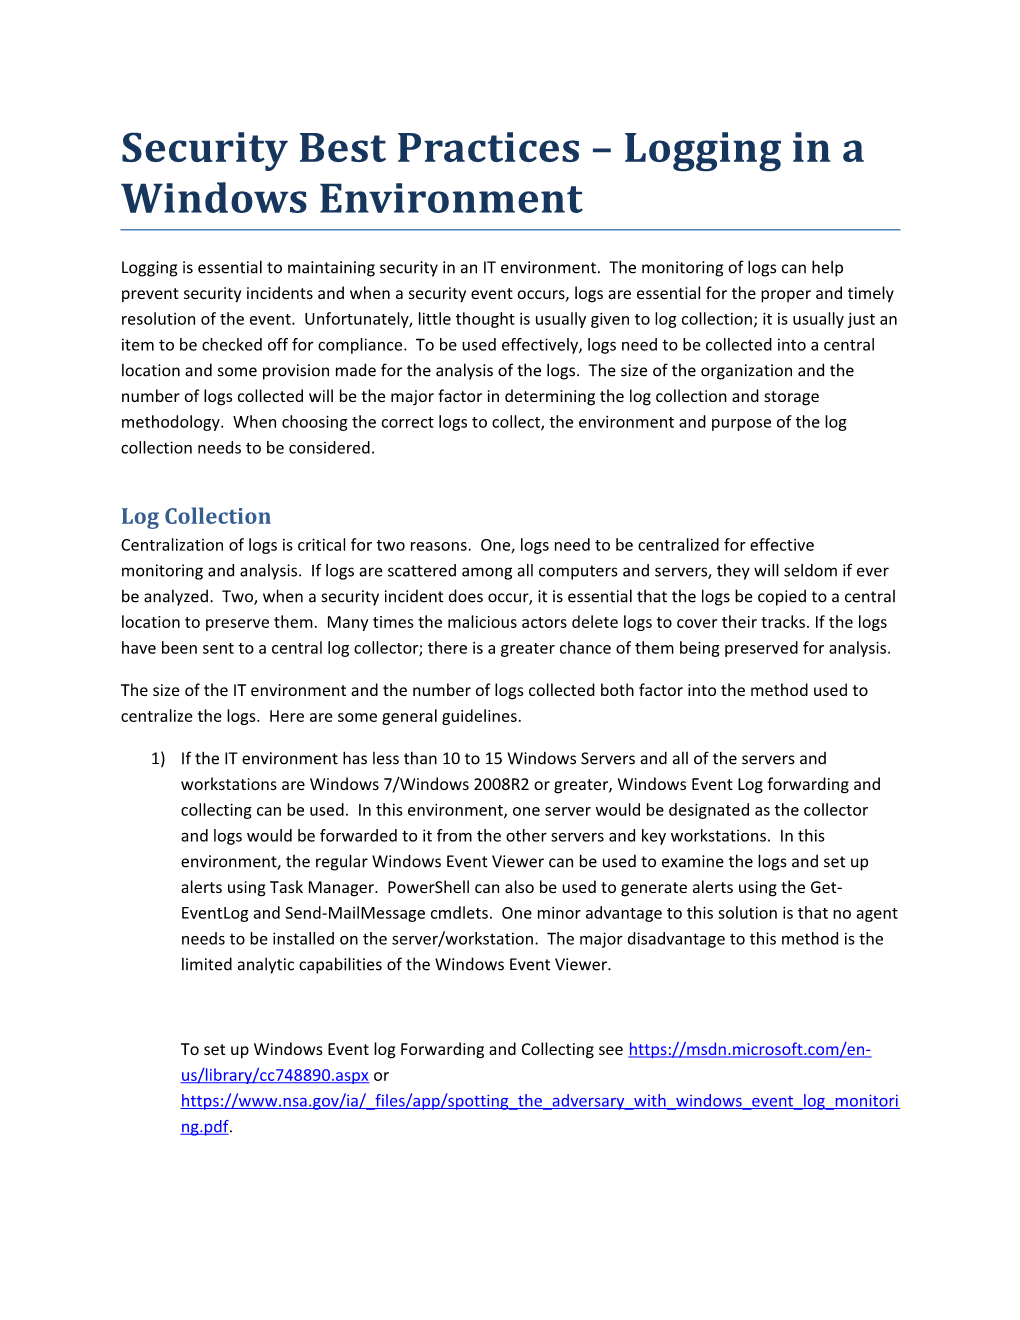 Security Best Practices Logging in a Windows Environment